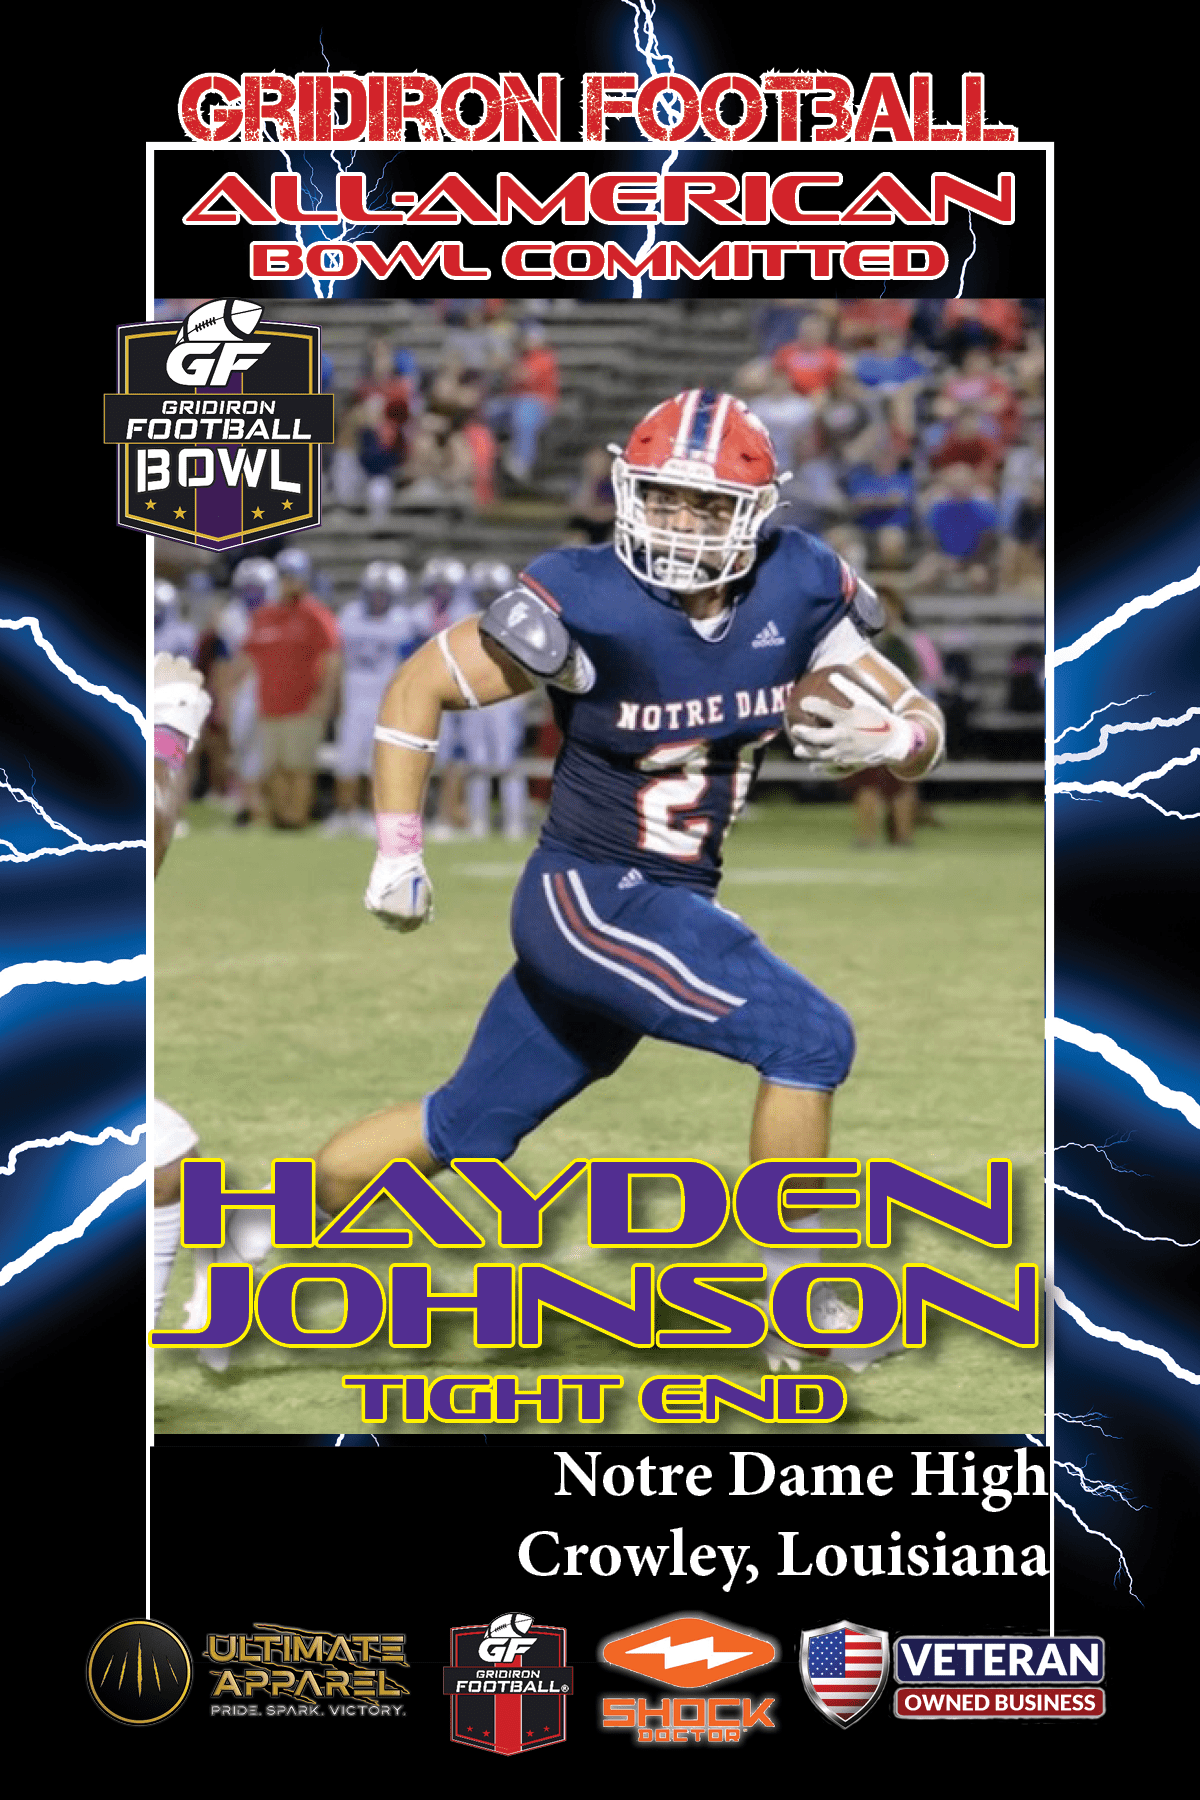 BREAKING NEWS: Notre Dame High School (Crowley, LA) TE Hayden Johnson Commits To The Gridiron Football All-American Bowl Game